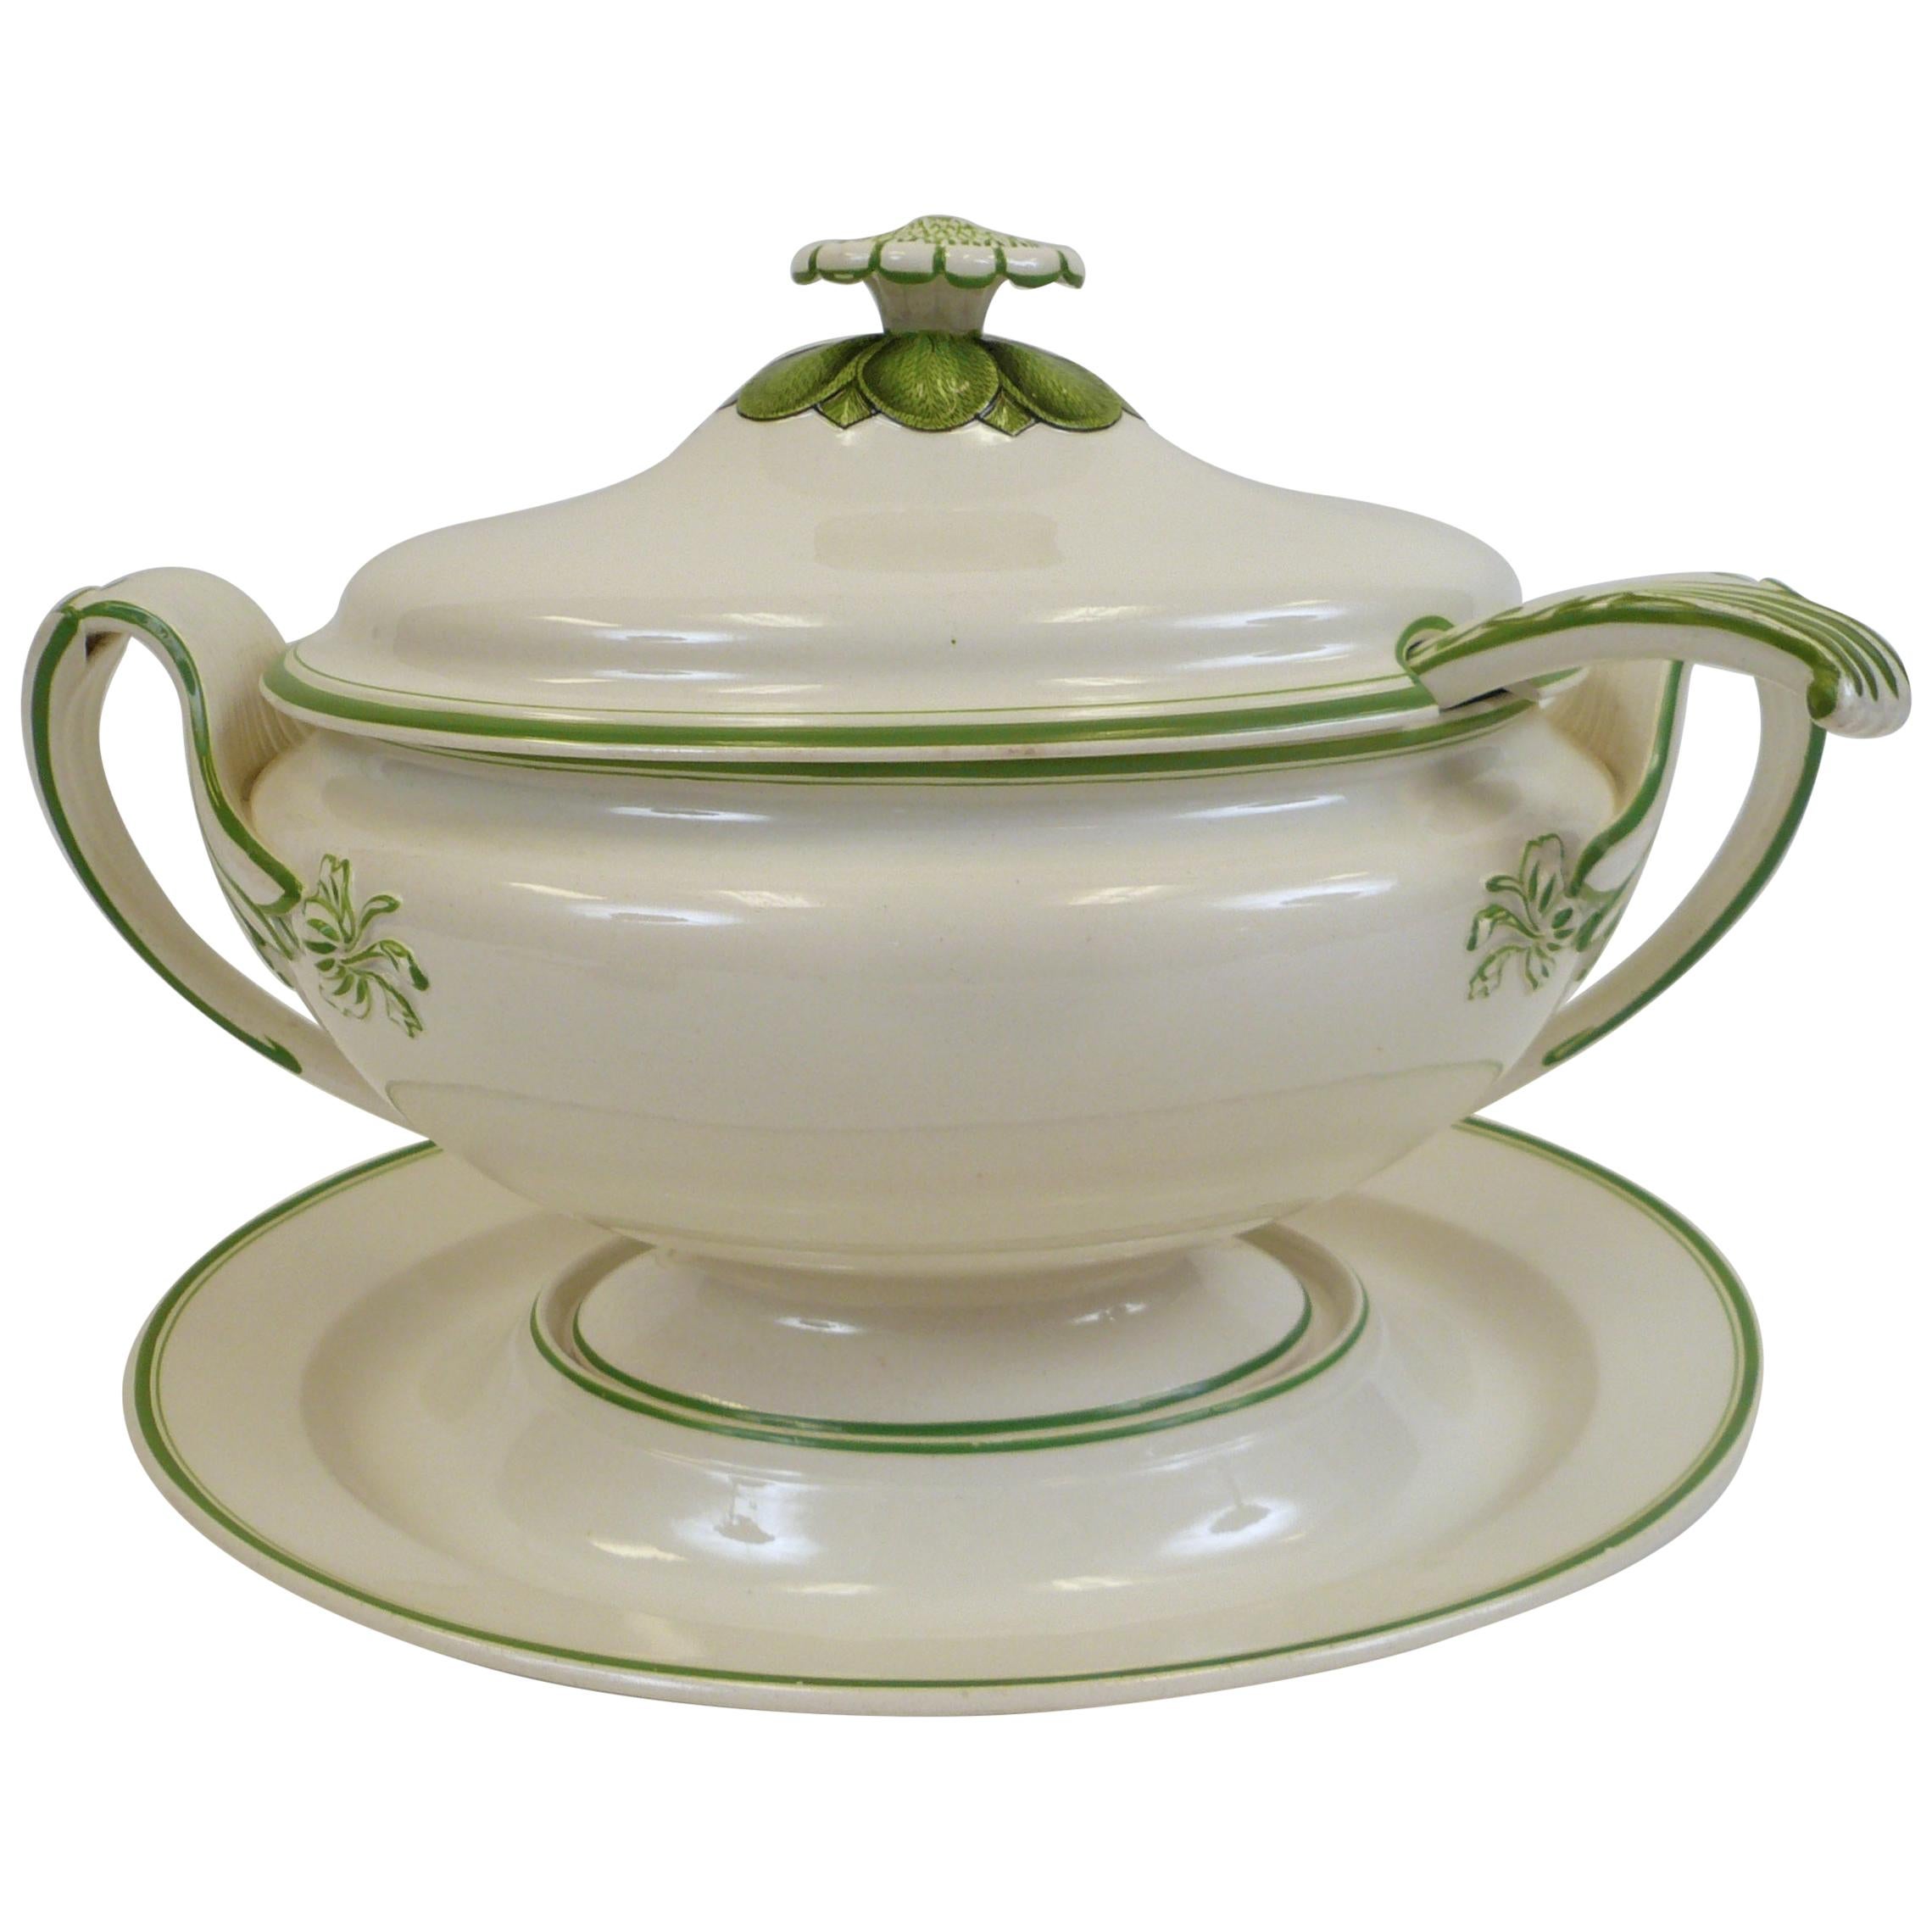 Early 19th Century Wedgwood Creamware Soup Tureen, Stand and Ladle